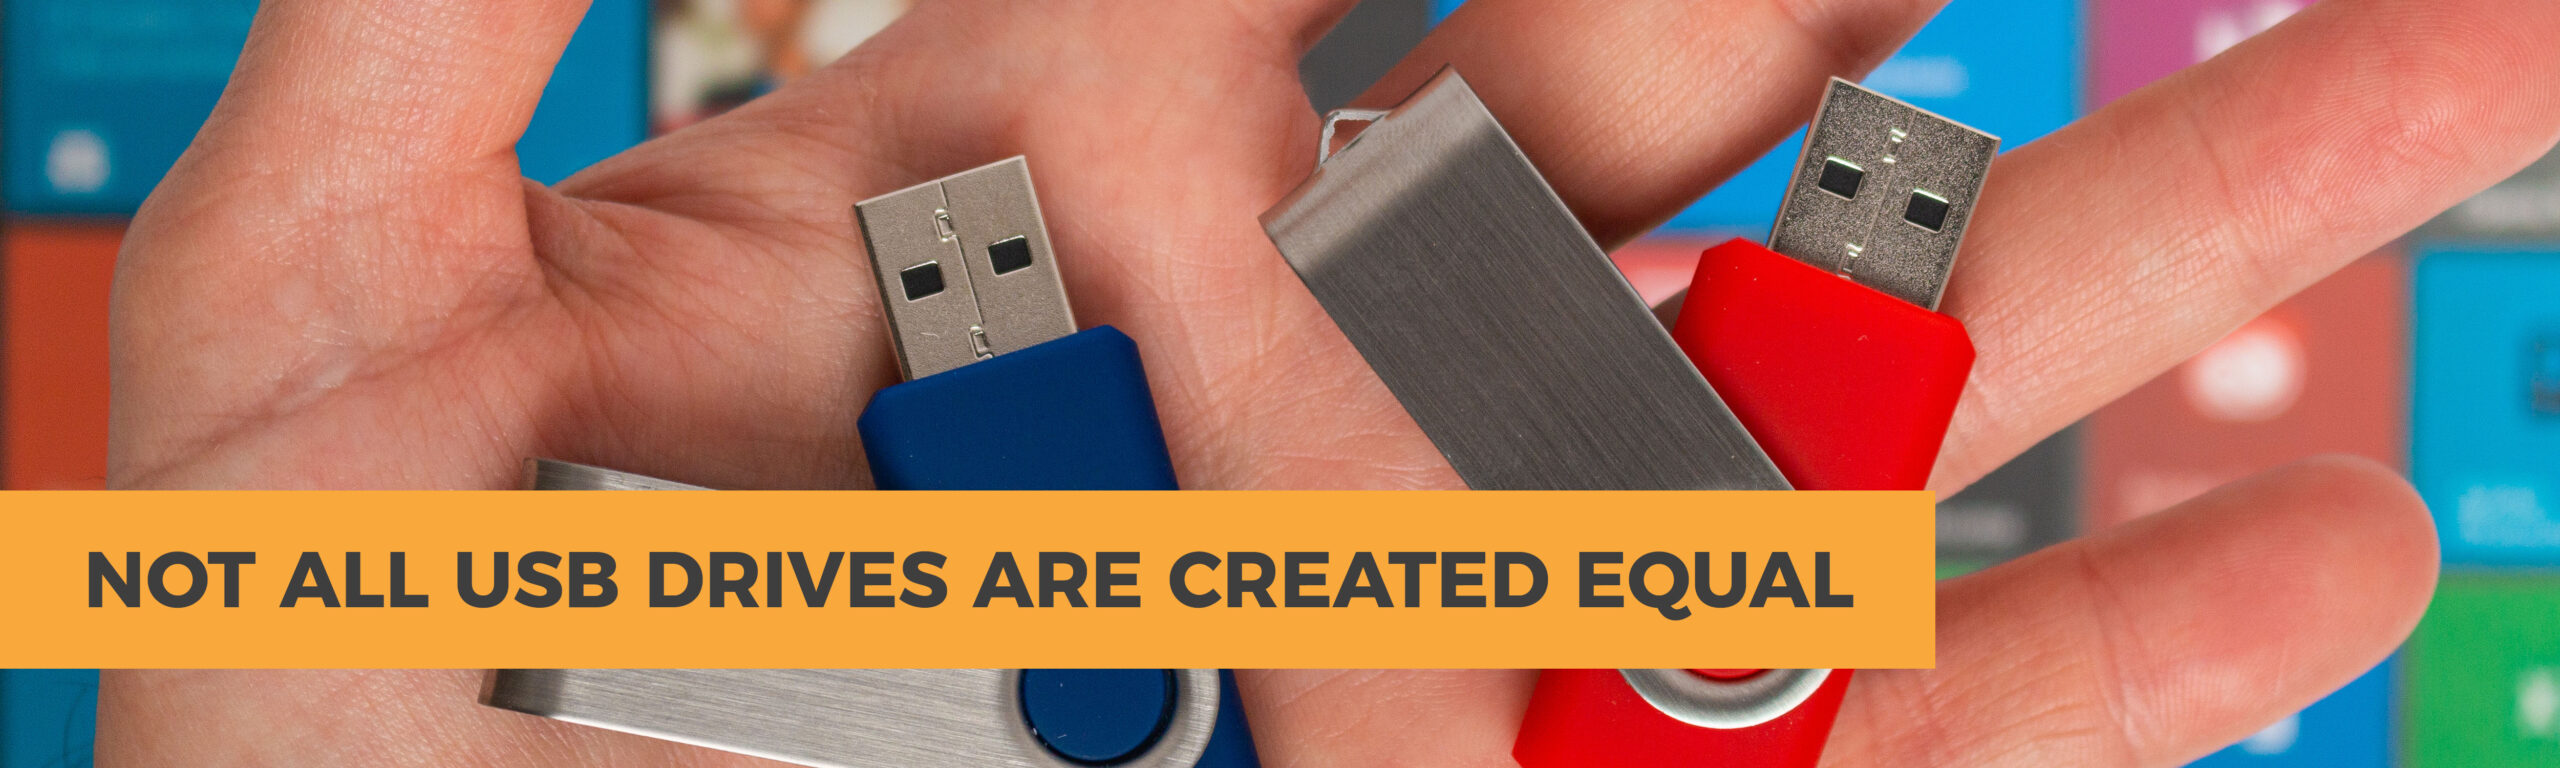 Not All USB Drives Are Created Equal